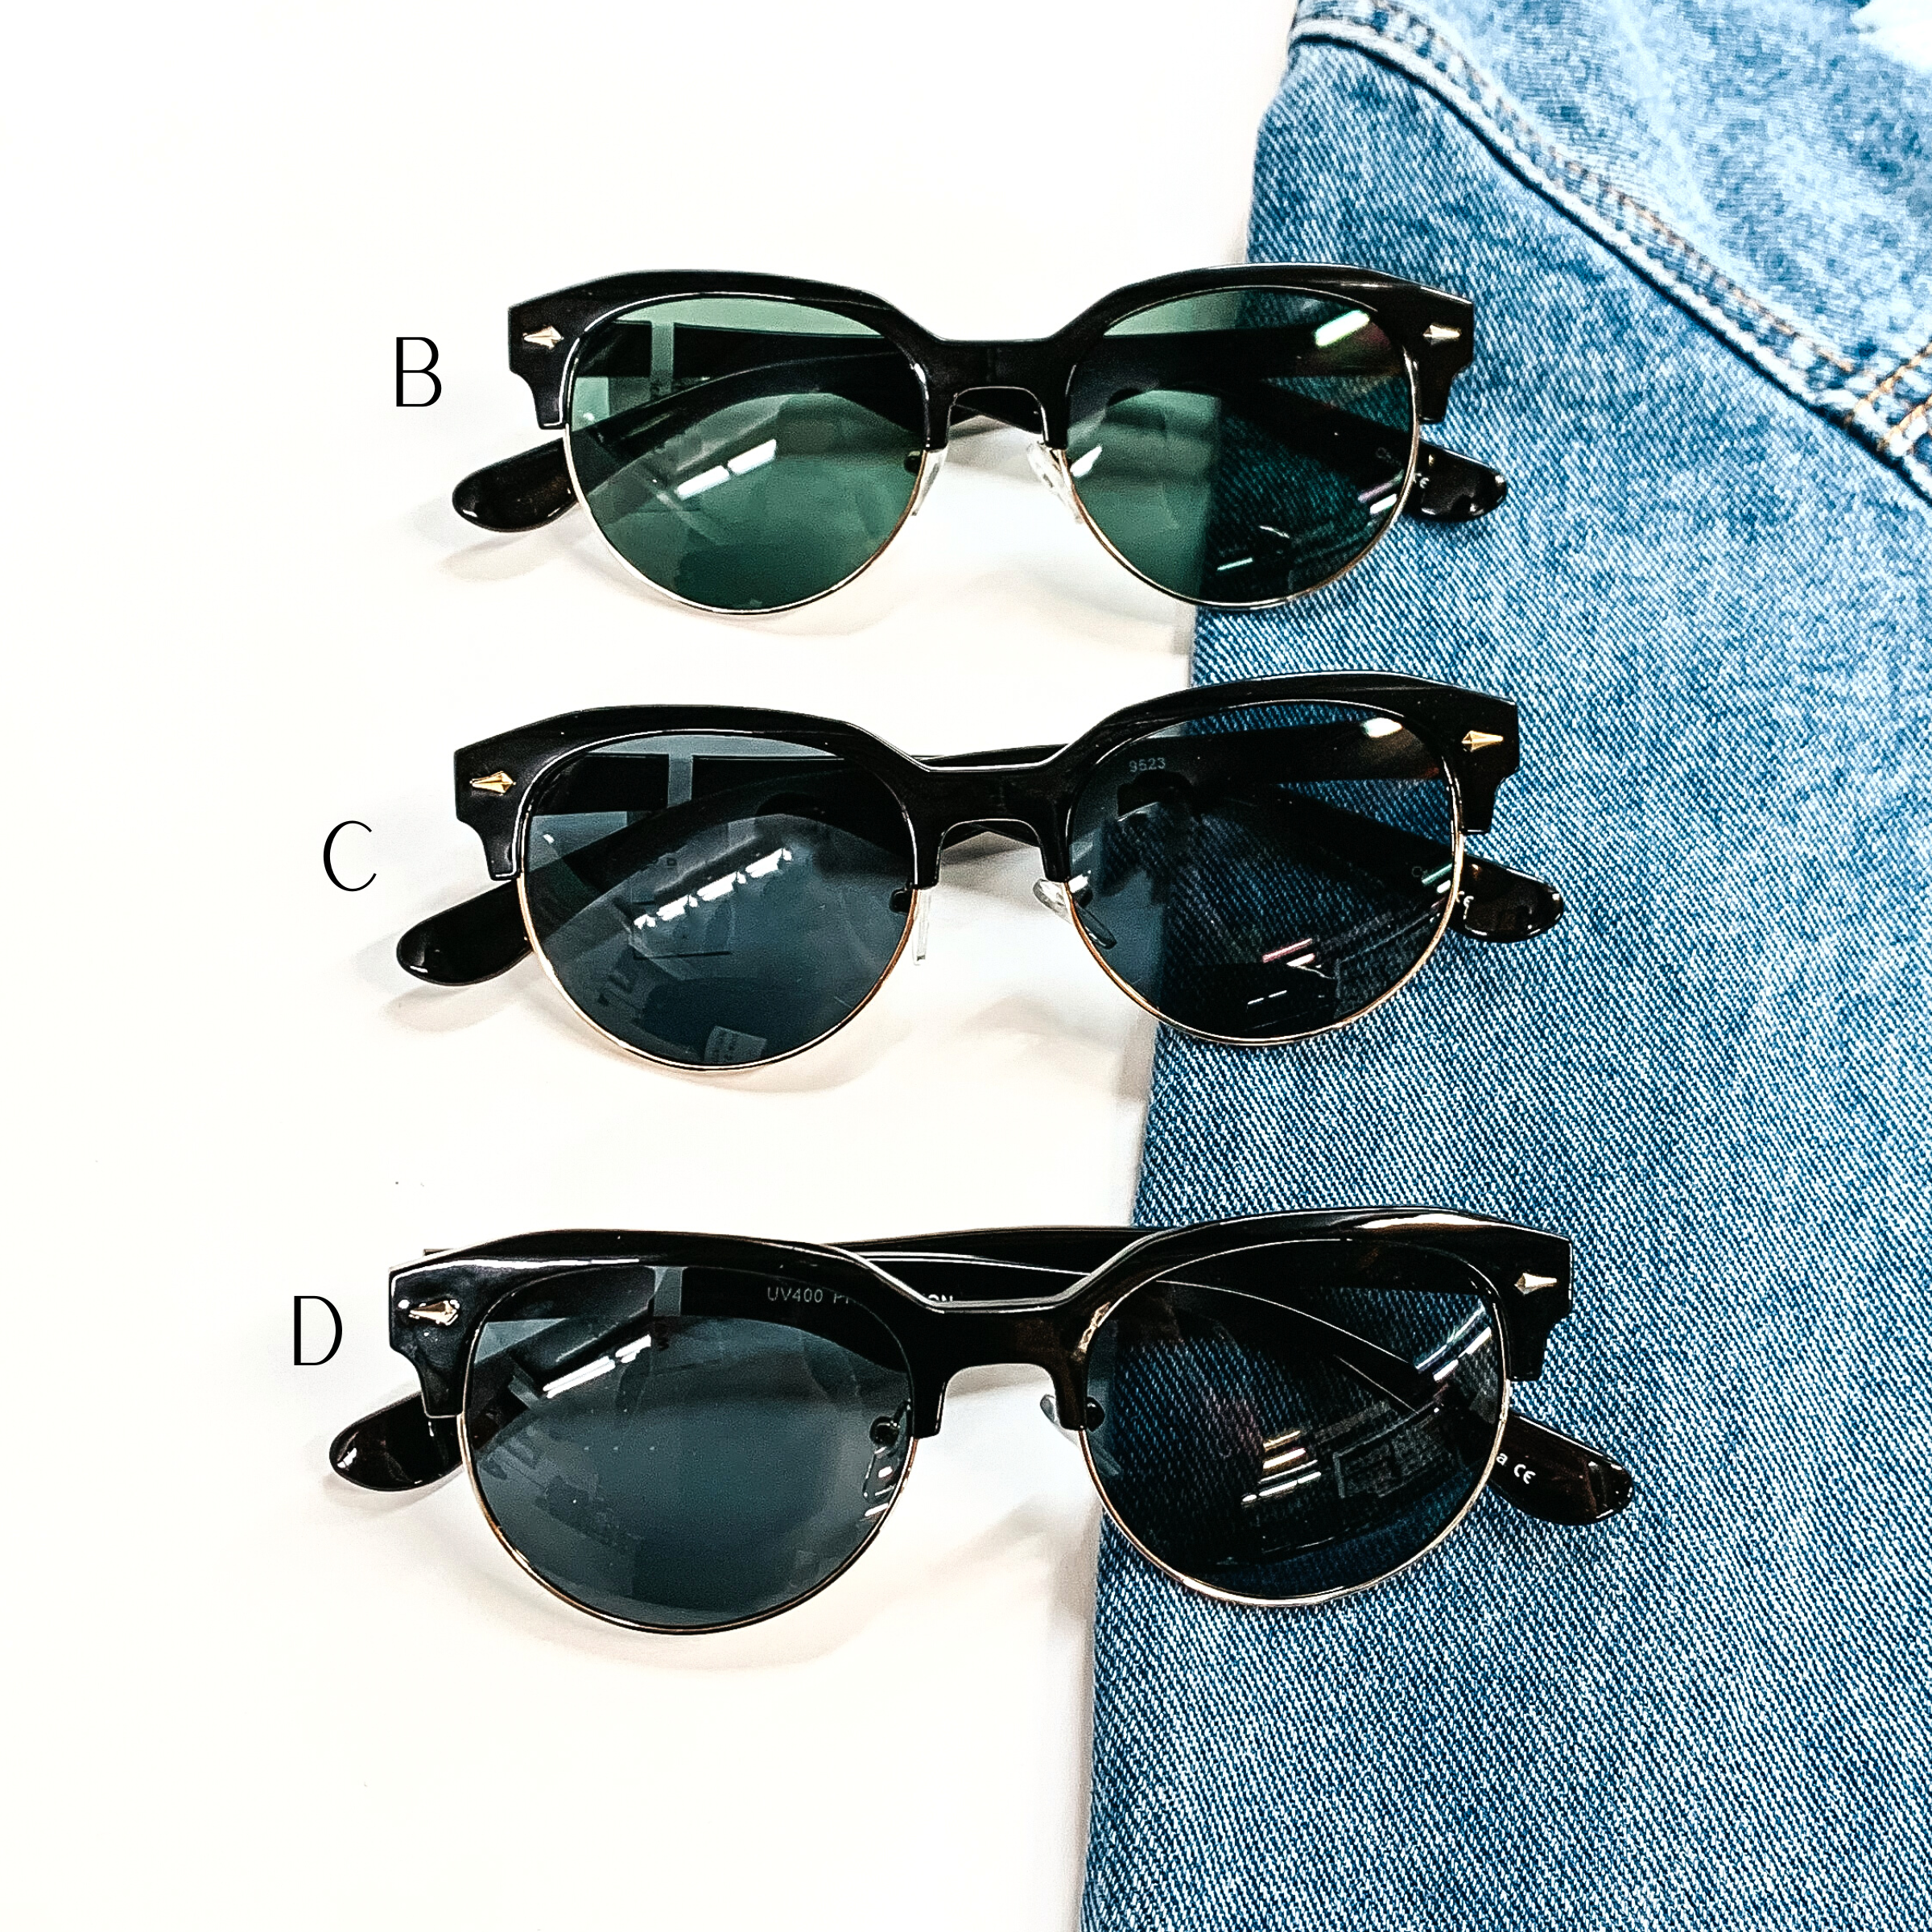 There are three pairs of browline style sunglasses in black for the frame  and different colors of lenses. Style B has a black frame, dark green  lense with a gold tone outline. Style C has a black frame, black/dark grey lense with a  gold tone outline. Style D has a black frame with a black/dark grey lense  with a silver tone outline. These three pairs of sunglasses are taken on a white  background and on a jean jacket sleeve.